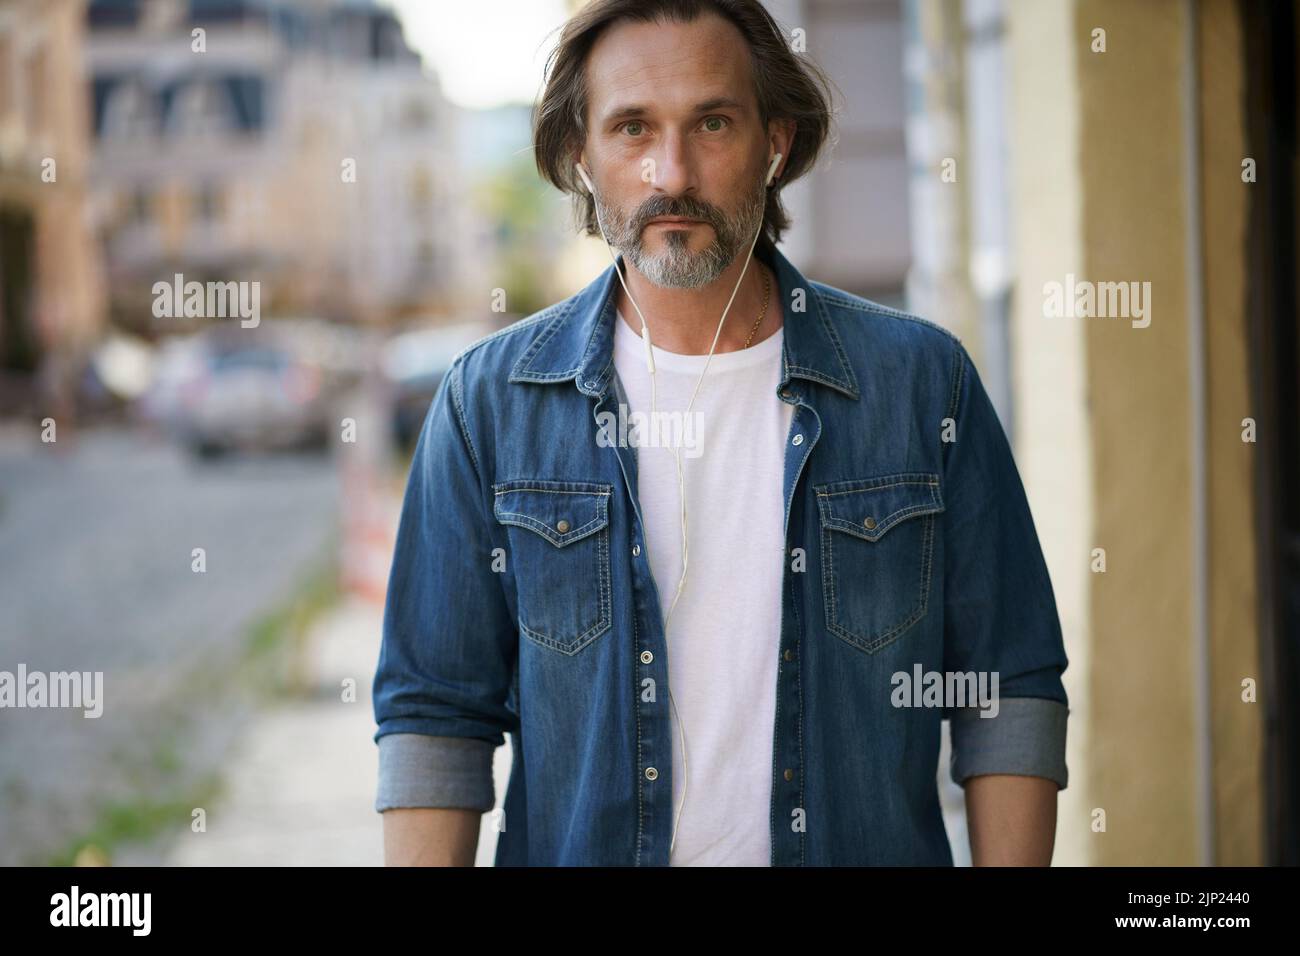 Handsome middle aged grey bearded man walking downtown with earphones listening music or talking on the phone wearing casual jeans shirt with white t-shirt. Travel lifestyle concept. Stock Photo